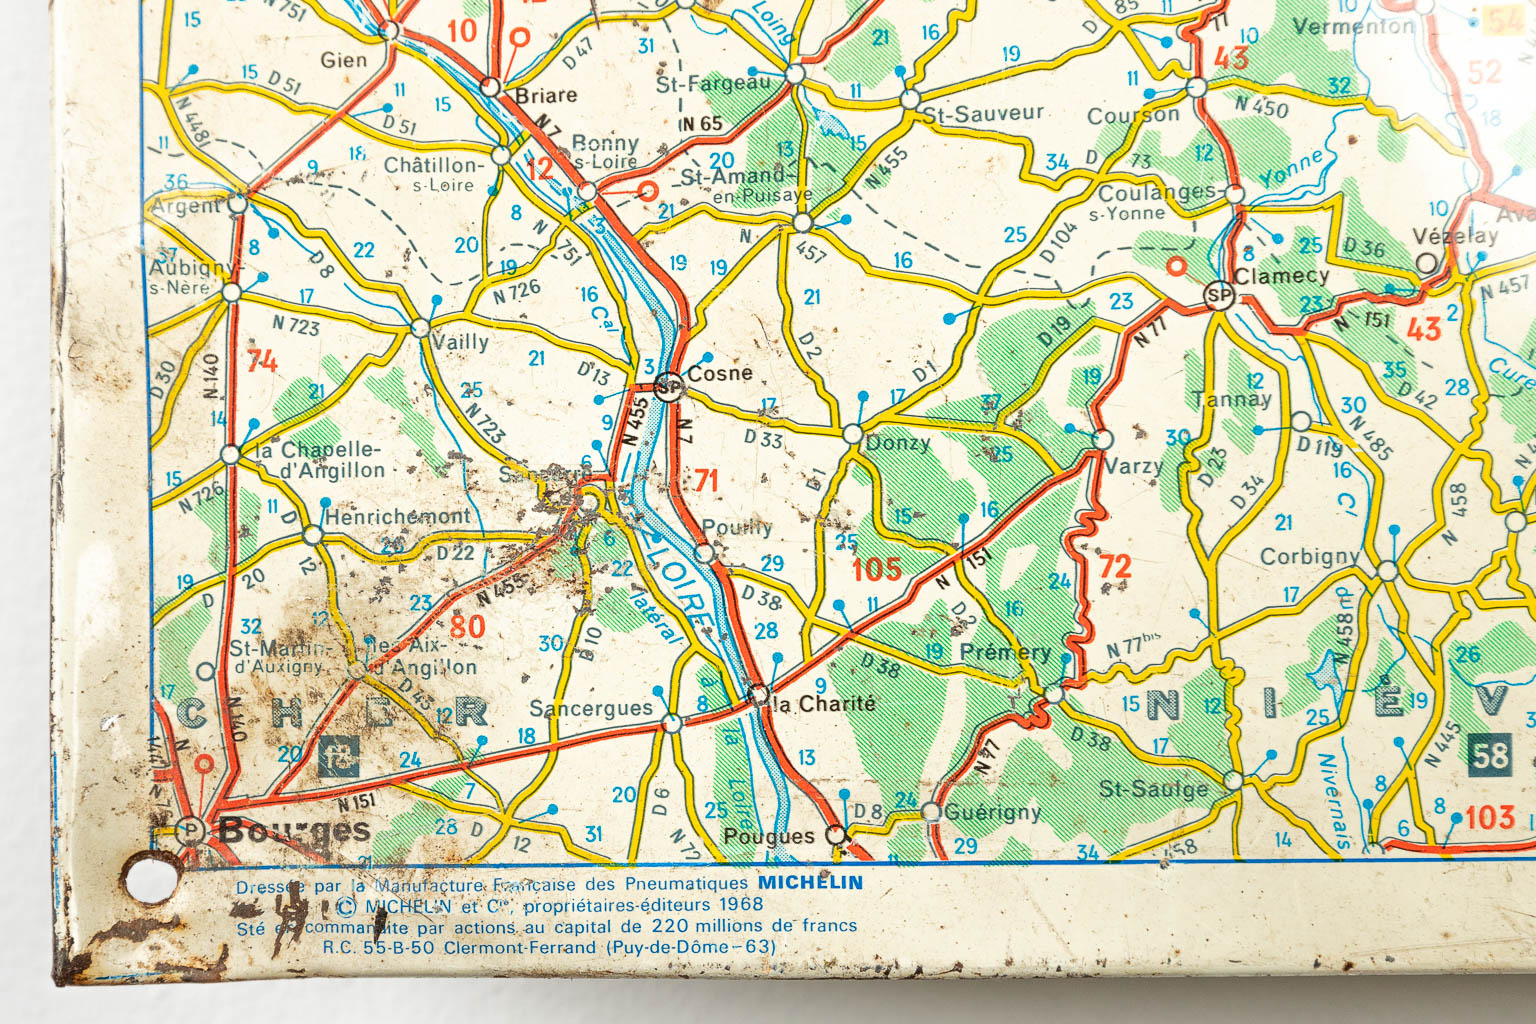 A vintage metal road sign made by Michelin, map of the BeNeLux 1968-1969. (H:79cm)